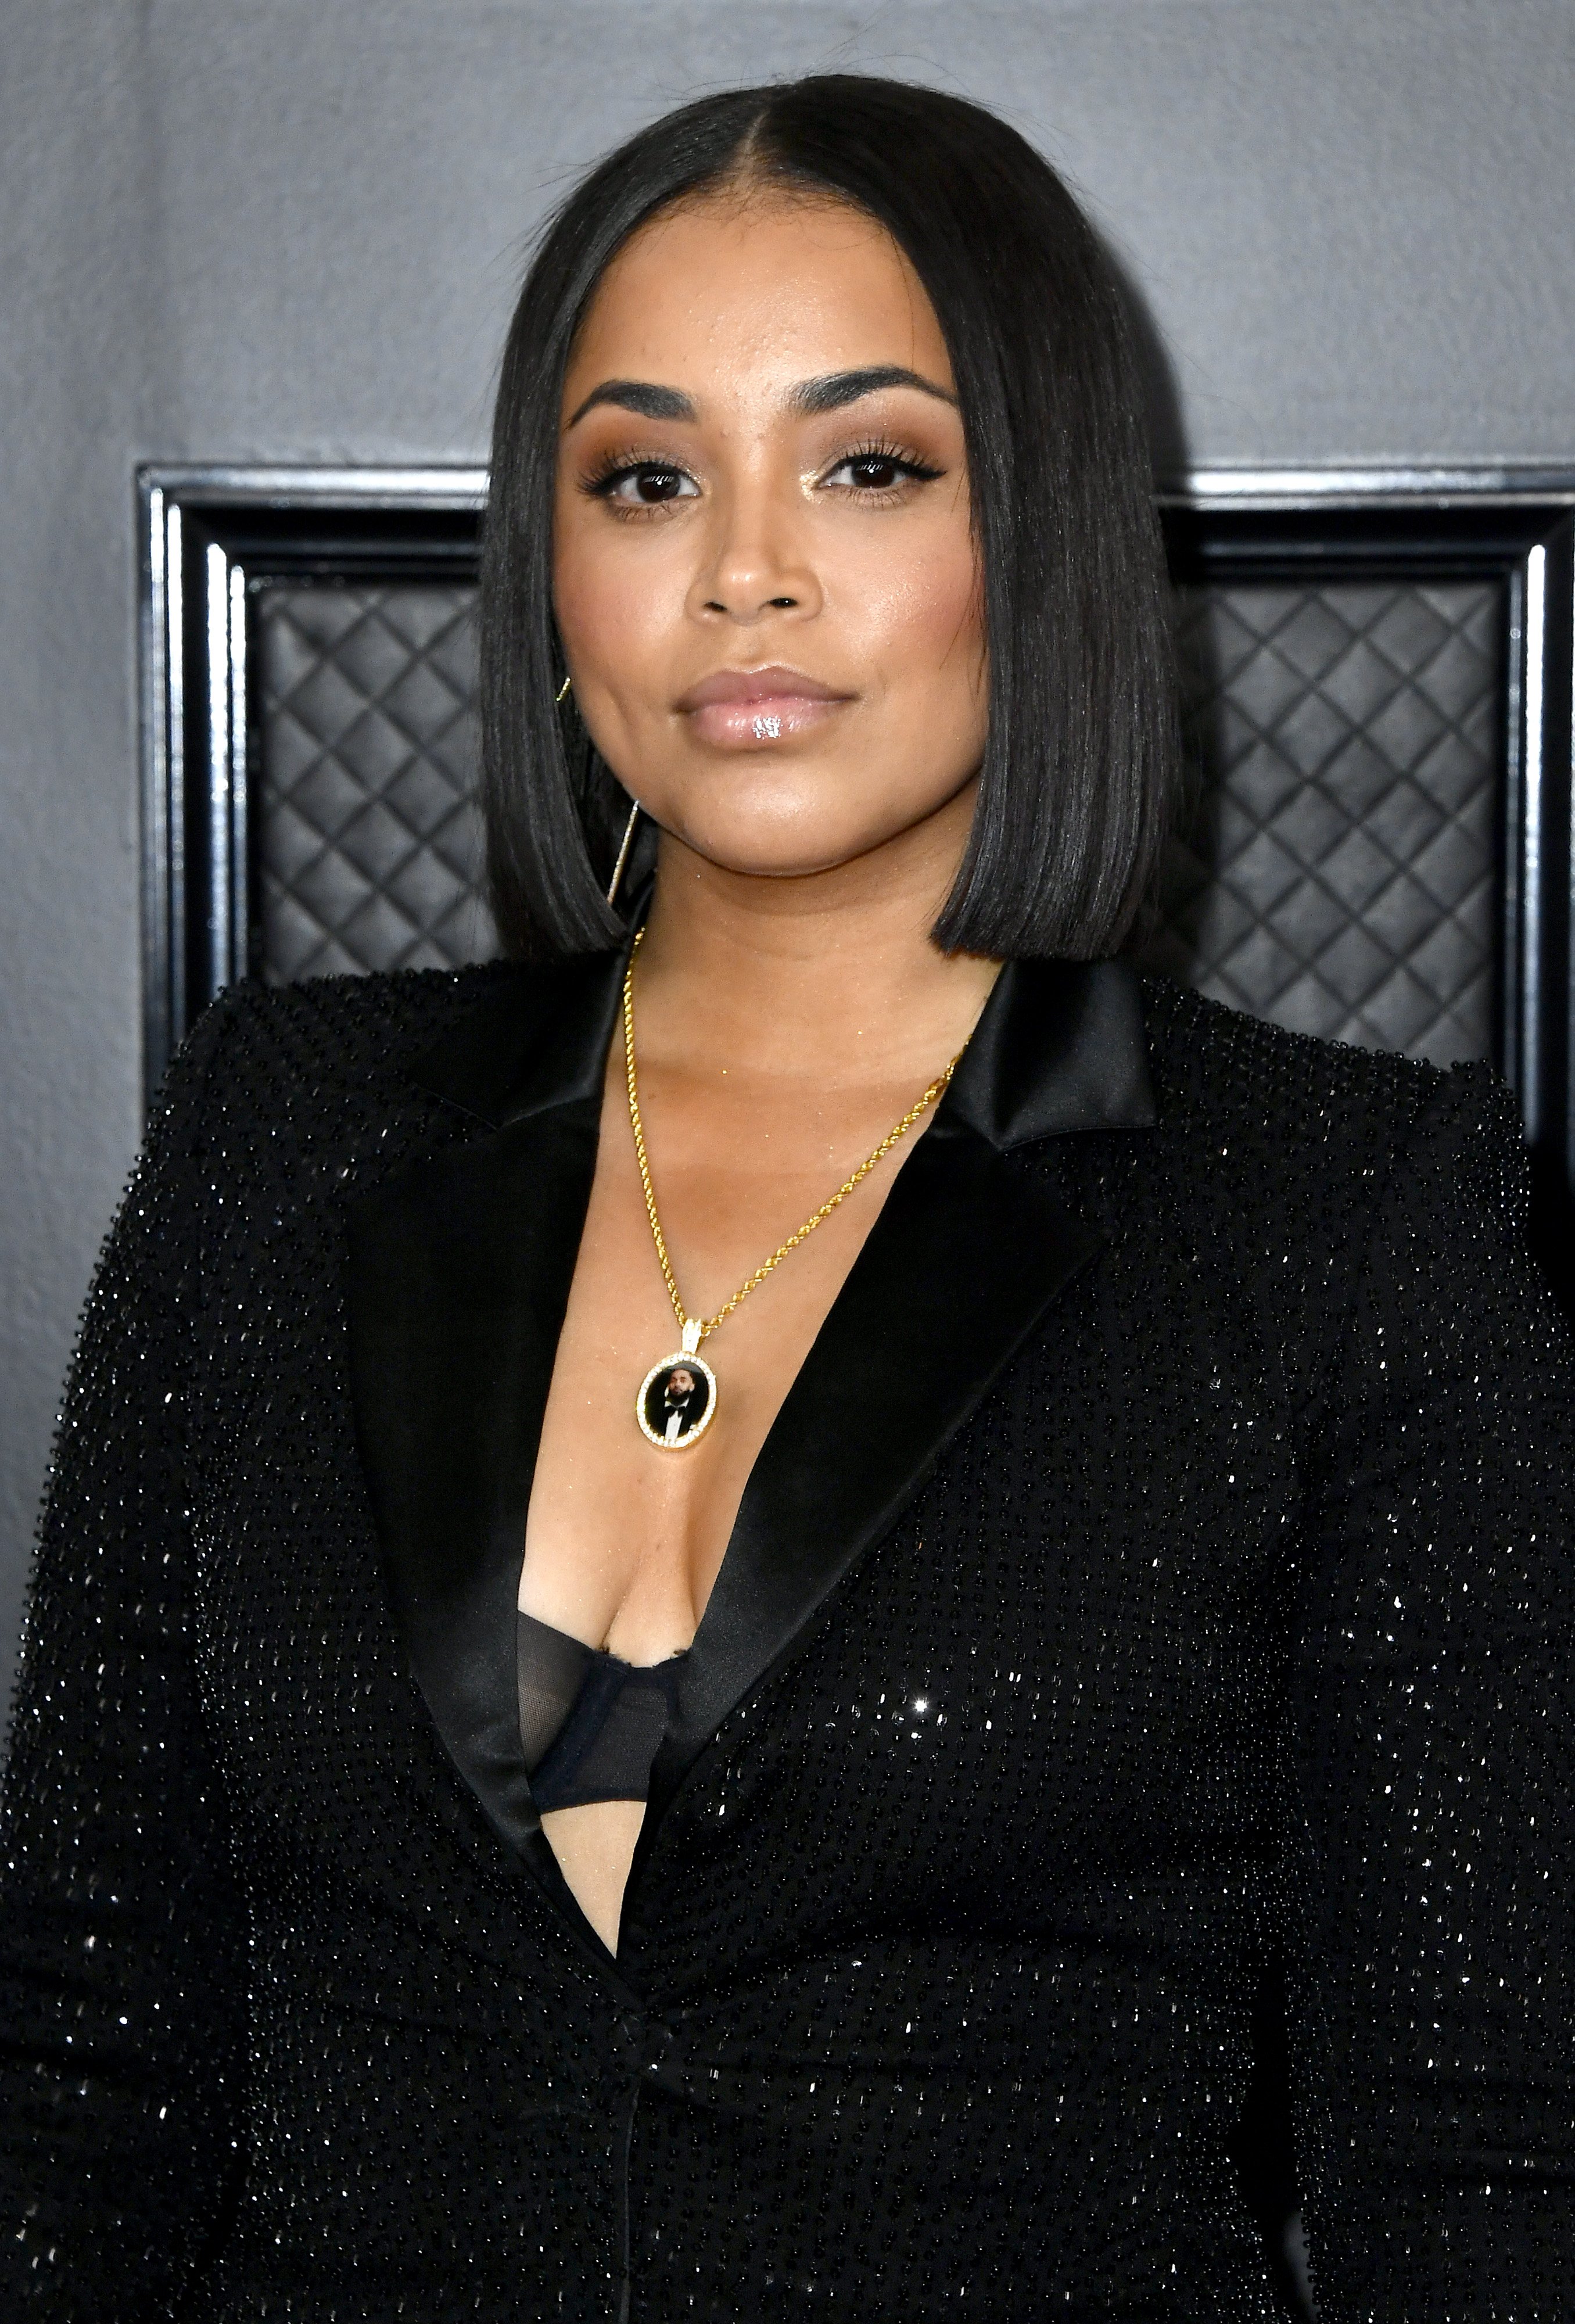 Lauren London pictured at the 62nd Annual Grammy Awards on January 26, 2020 in California | Photo: Getty Images